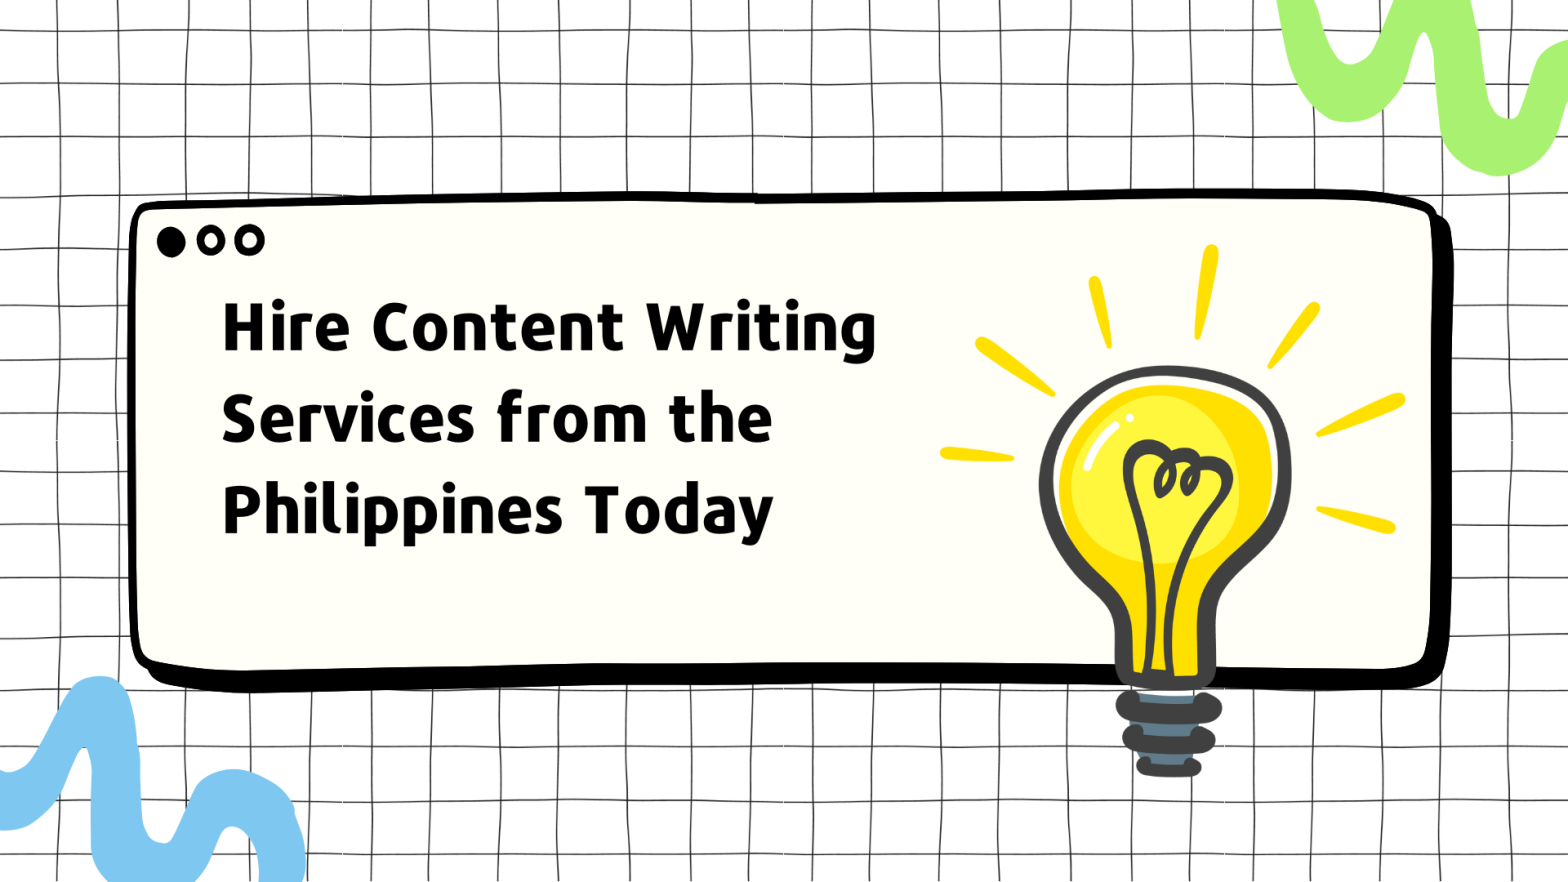 Hire Content Writing Services from the Philippines Today